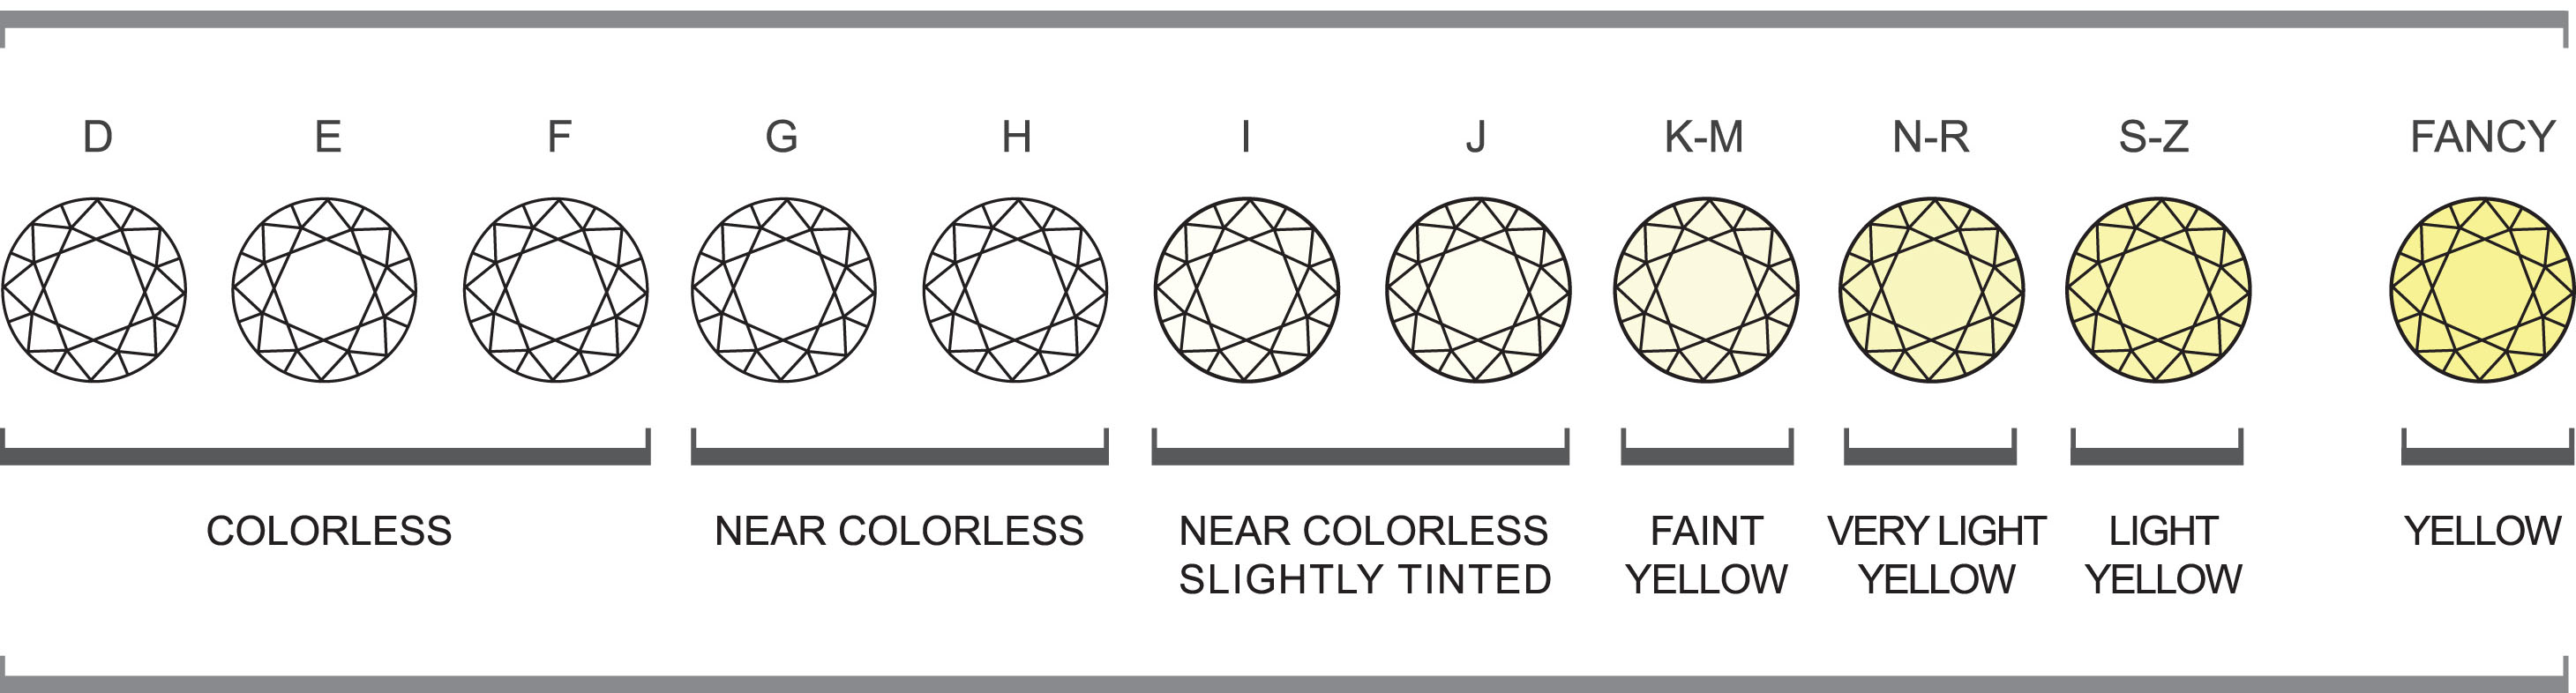 Color Clarity Of Diamonds In A Chart